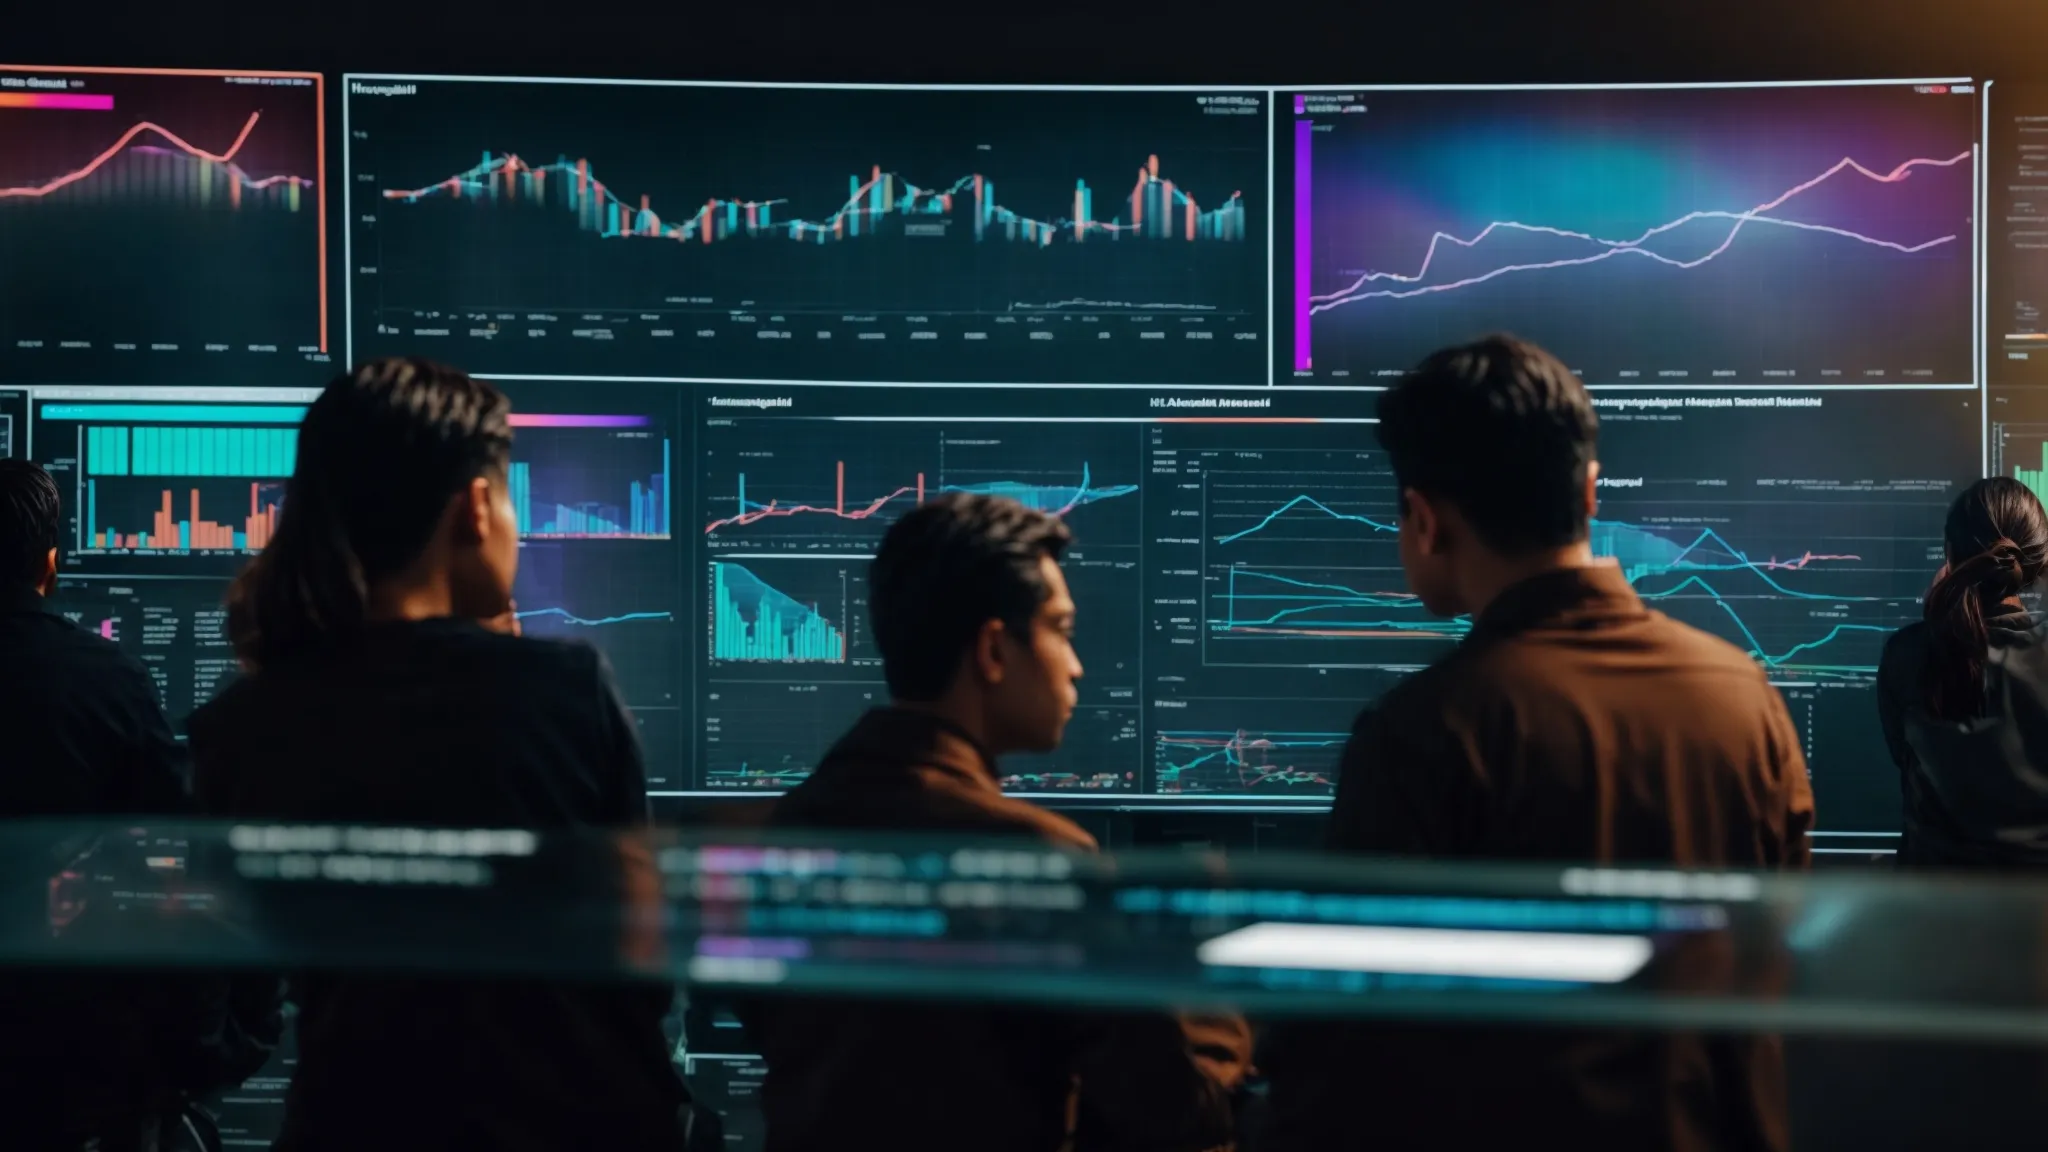 a group of professionals gaze intently at a large screen displaying colorful graphs and website data analytics.